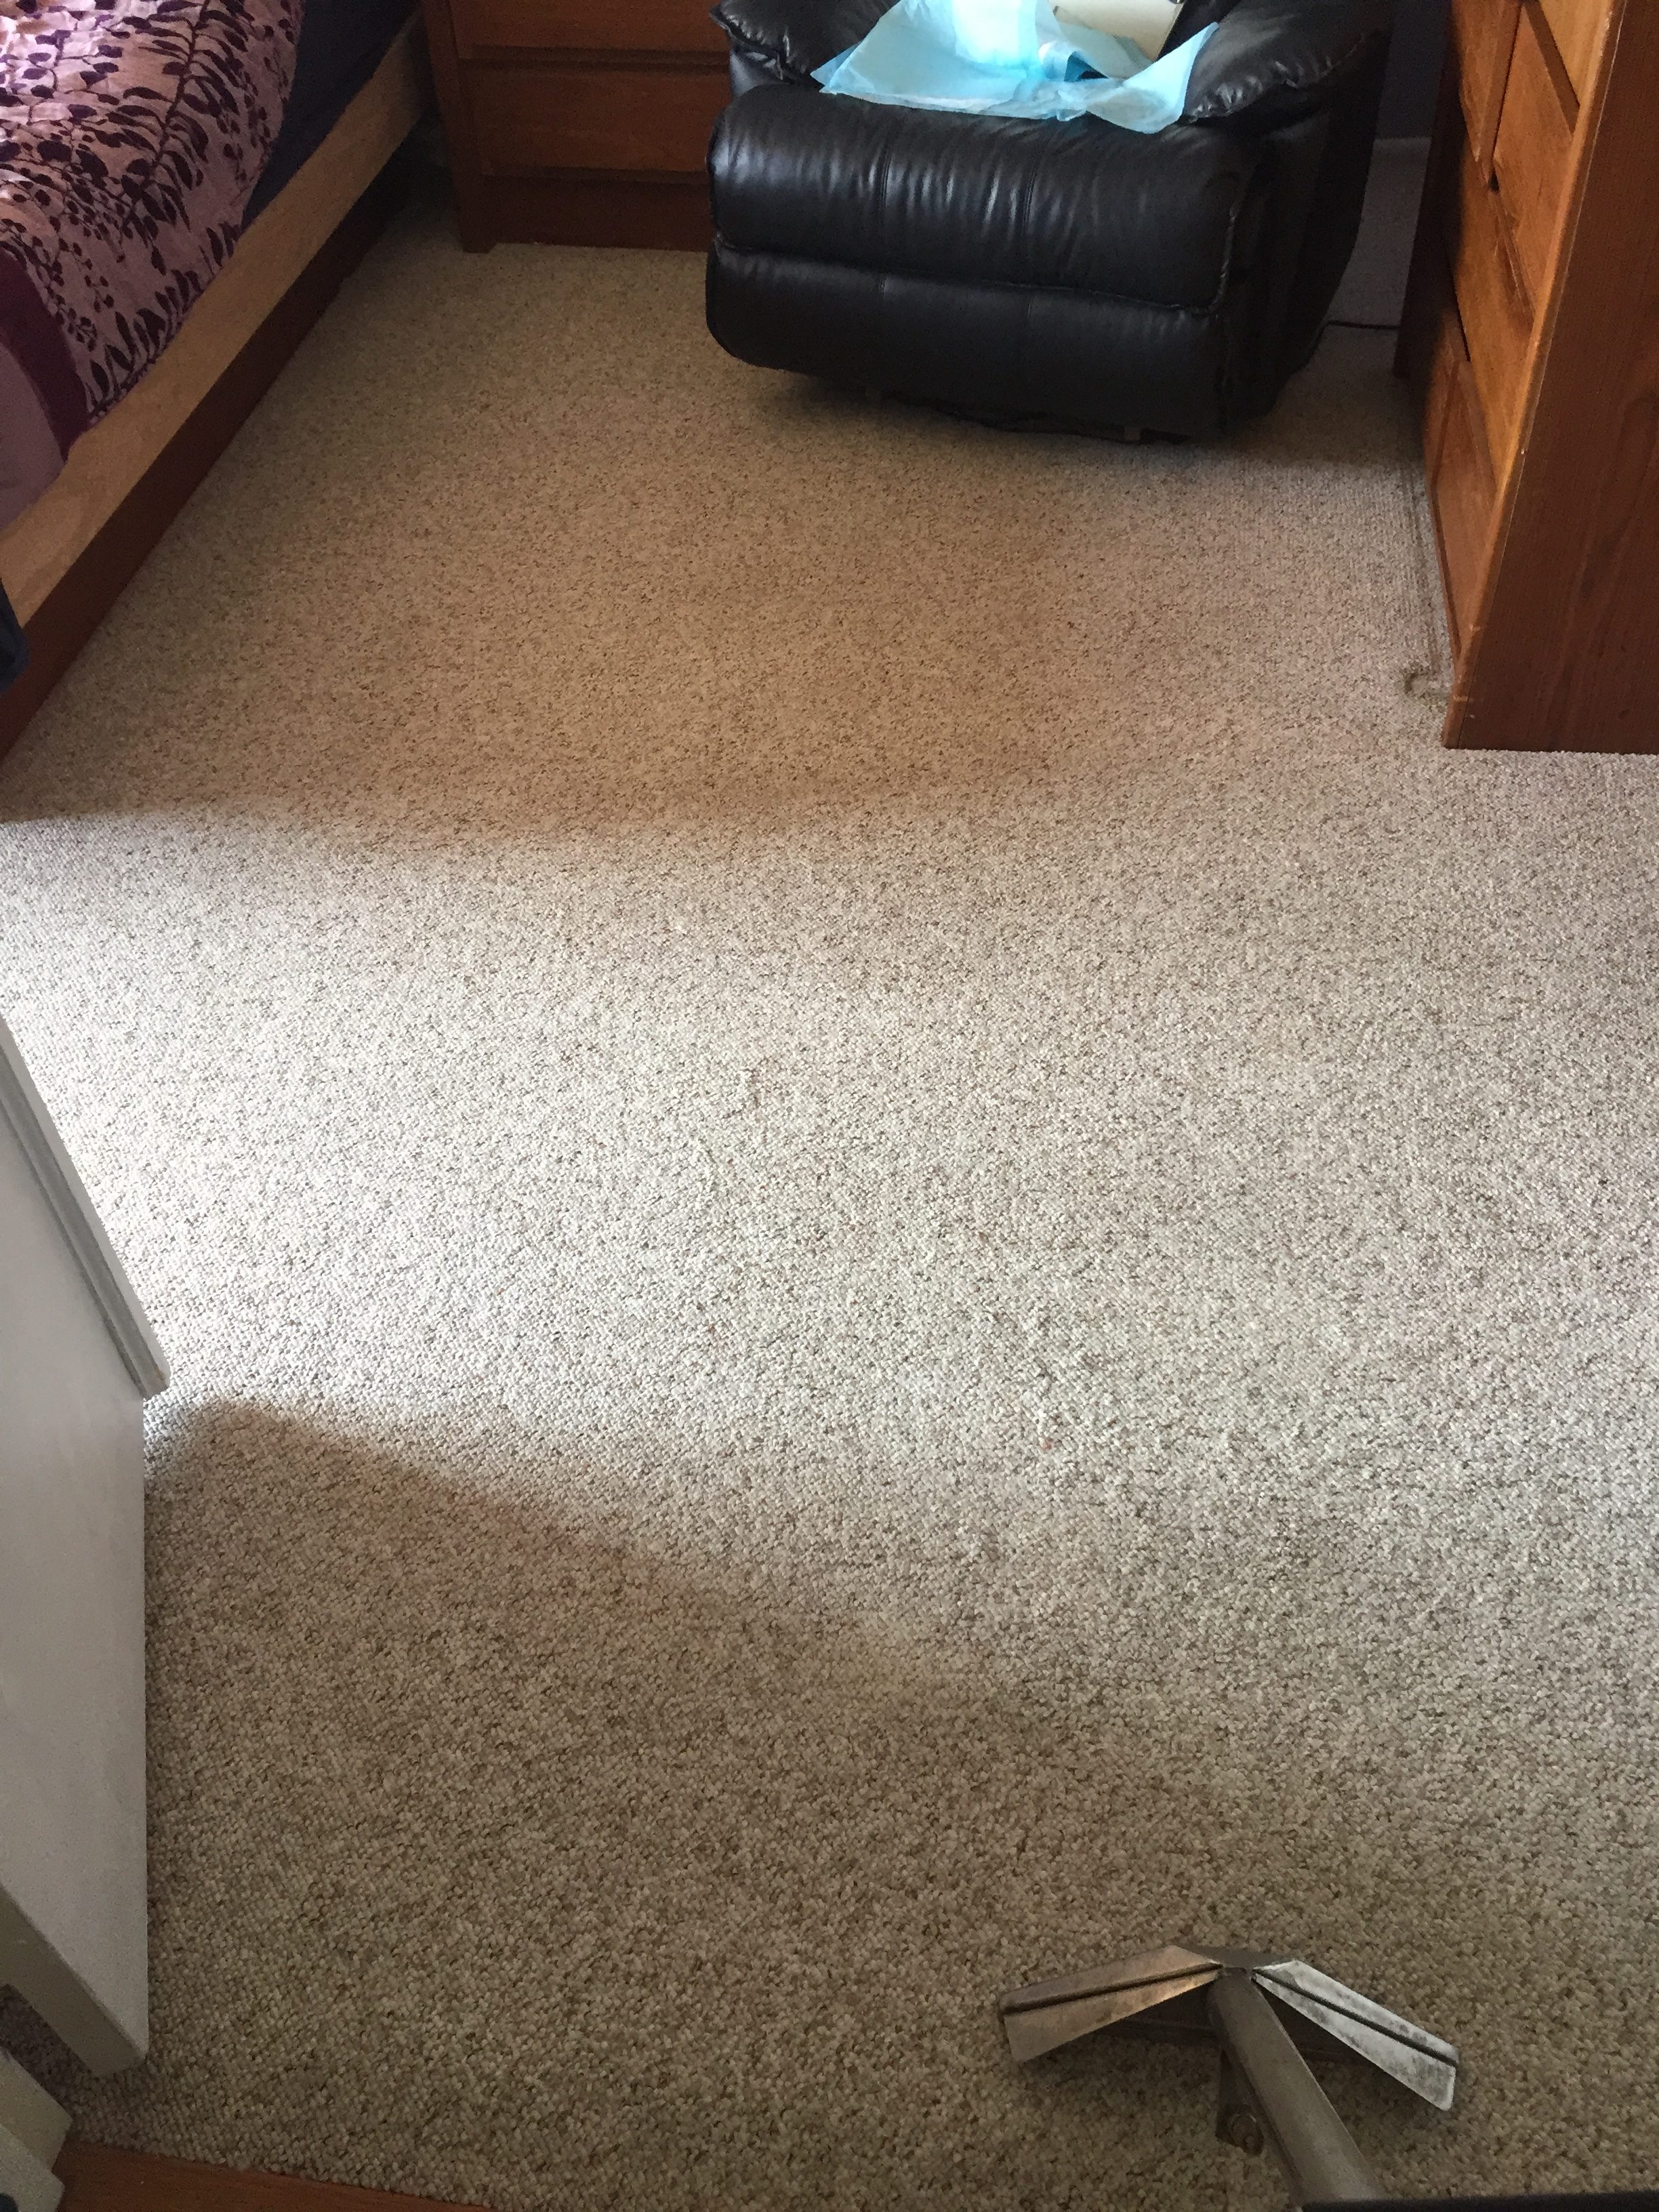 Carpet Cleaning – After